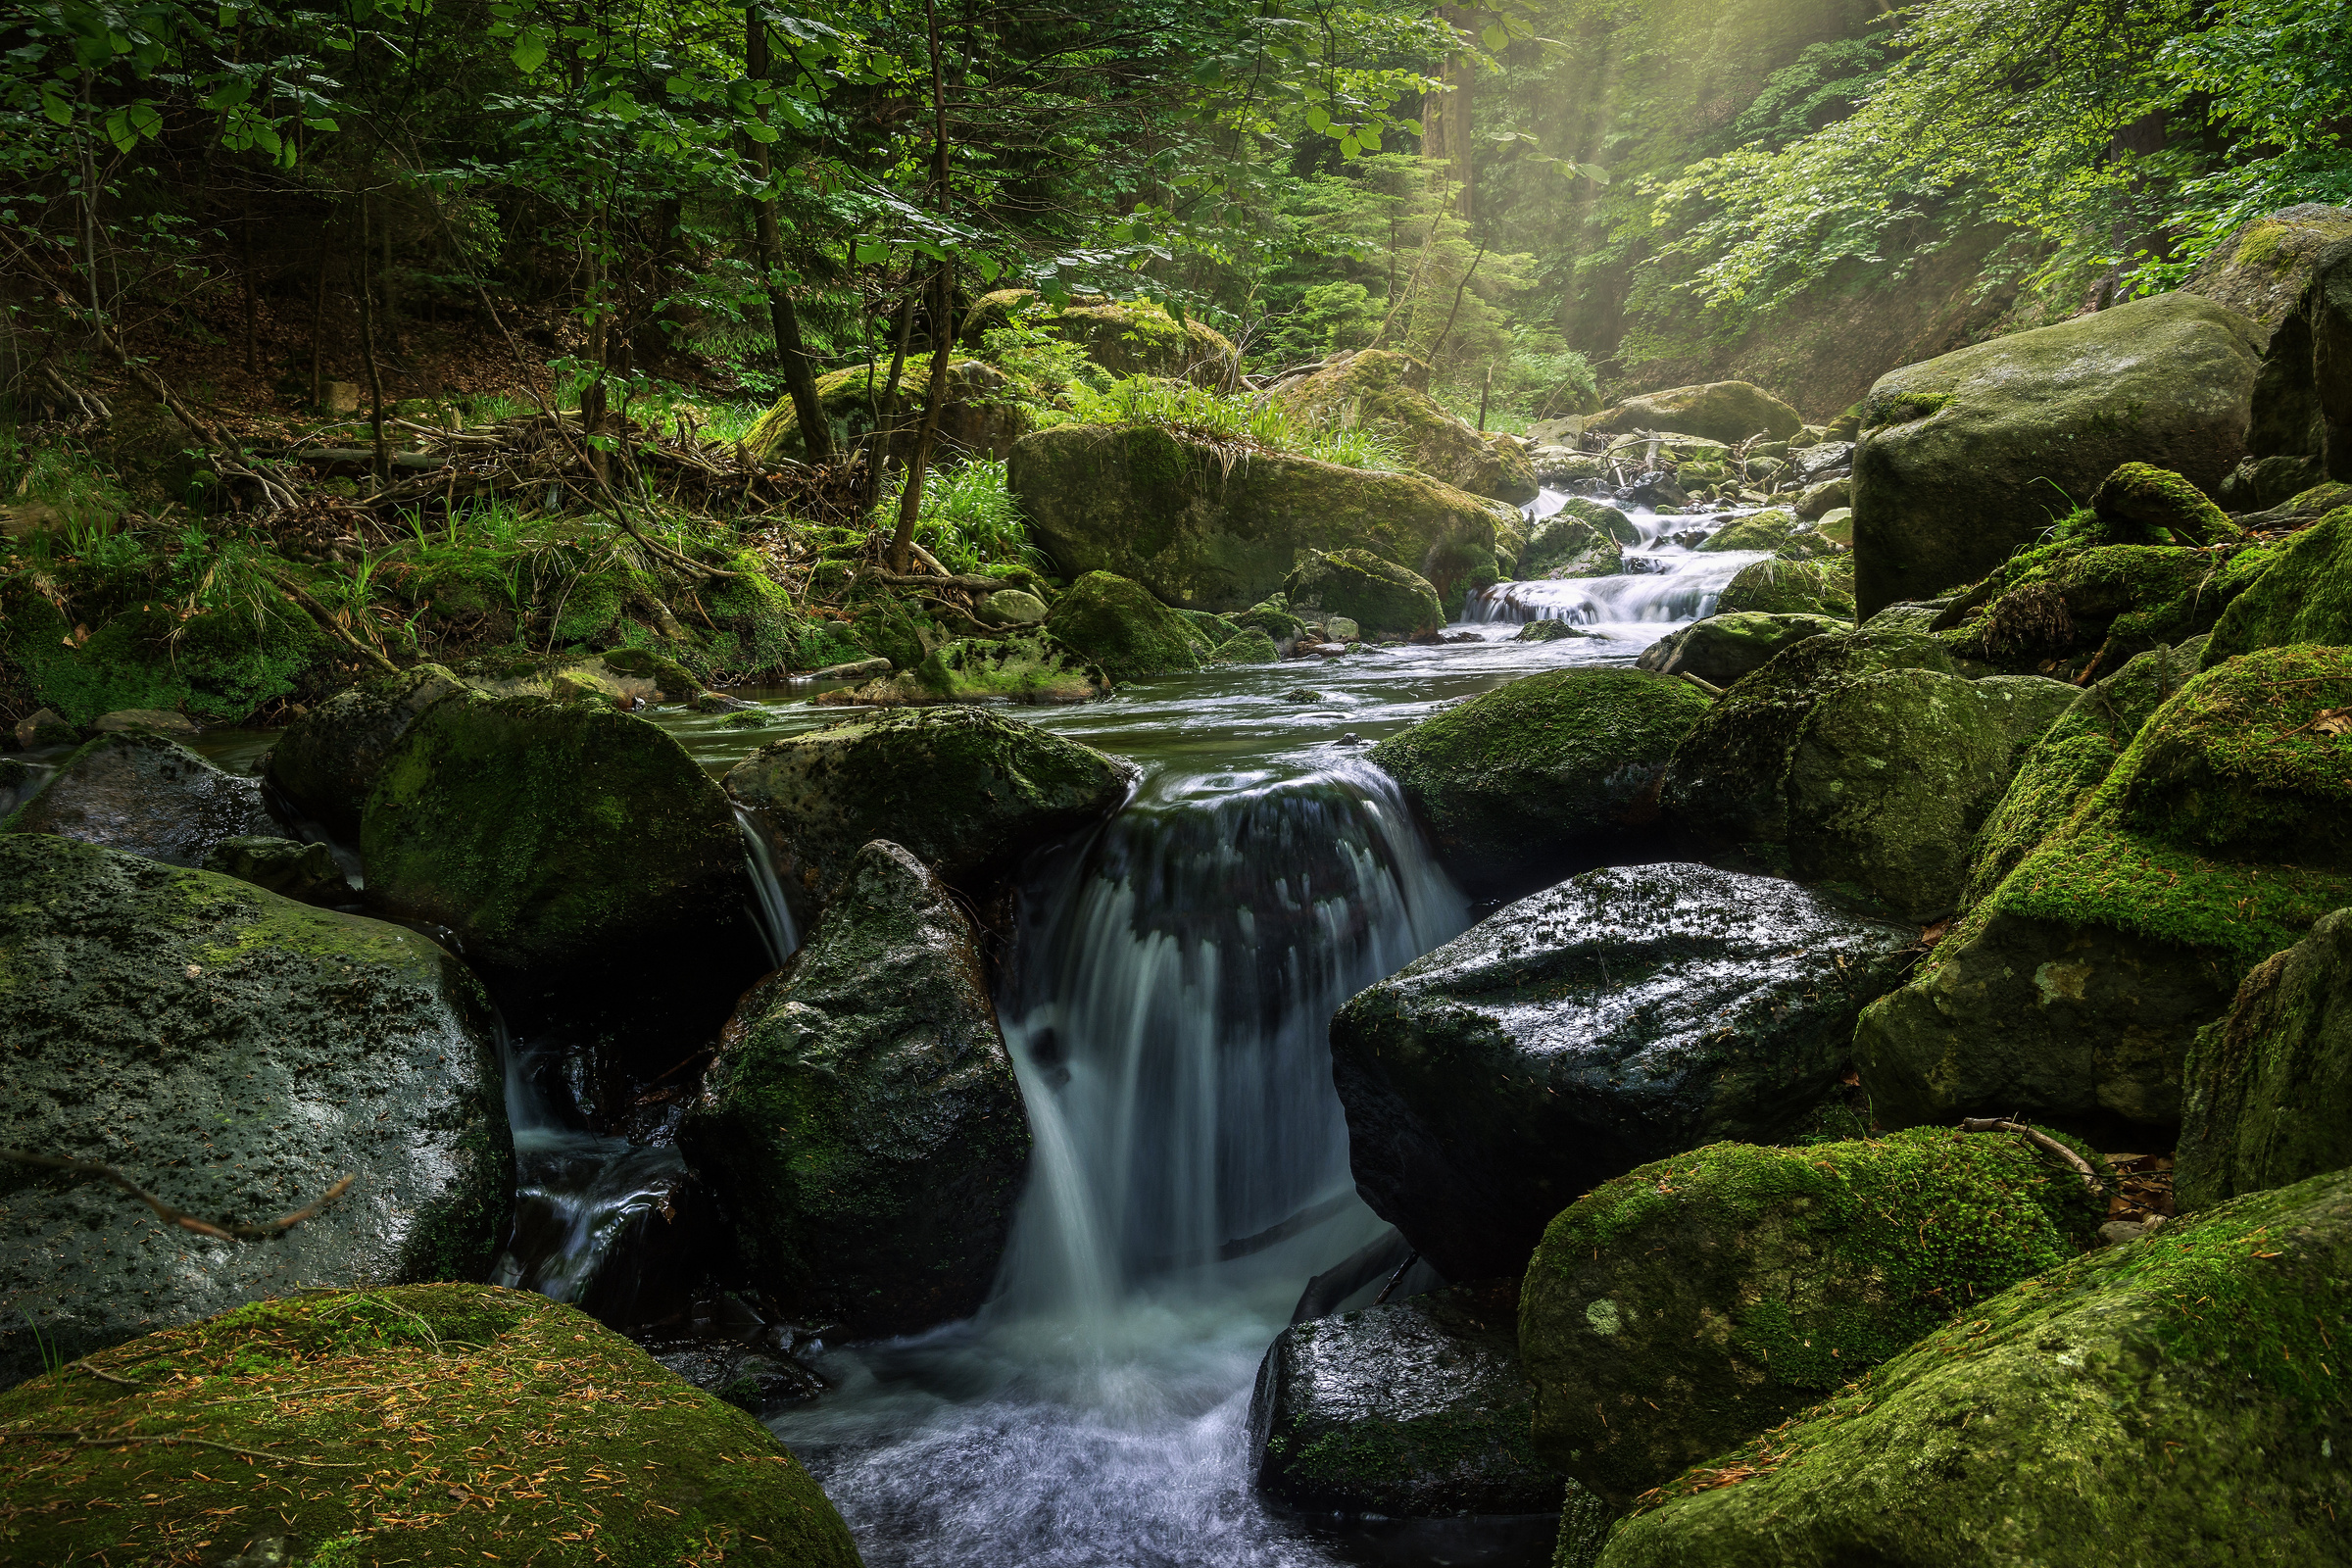 Stones With Moss And Waterfalls